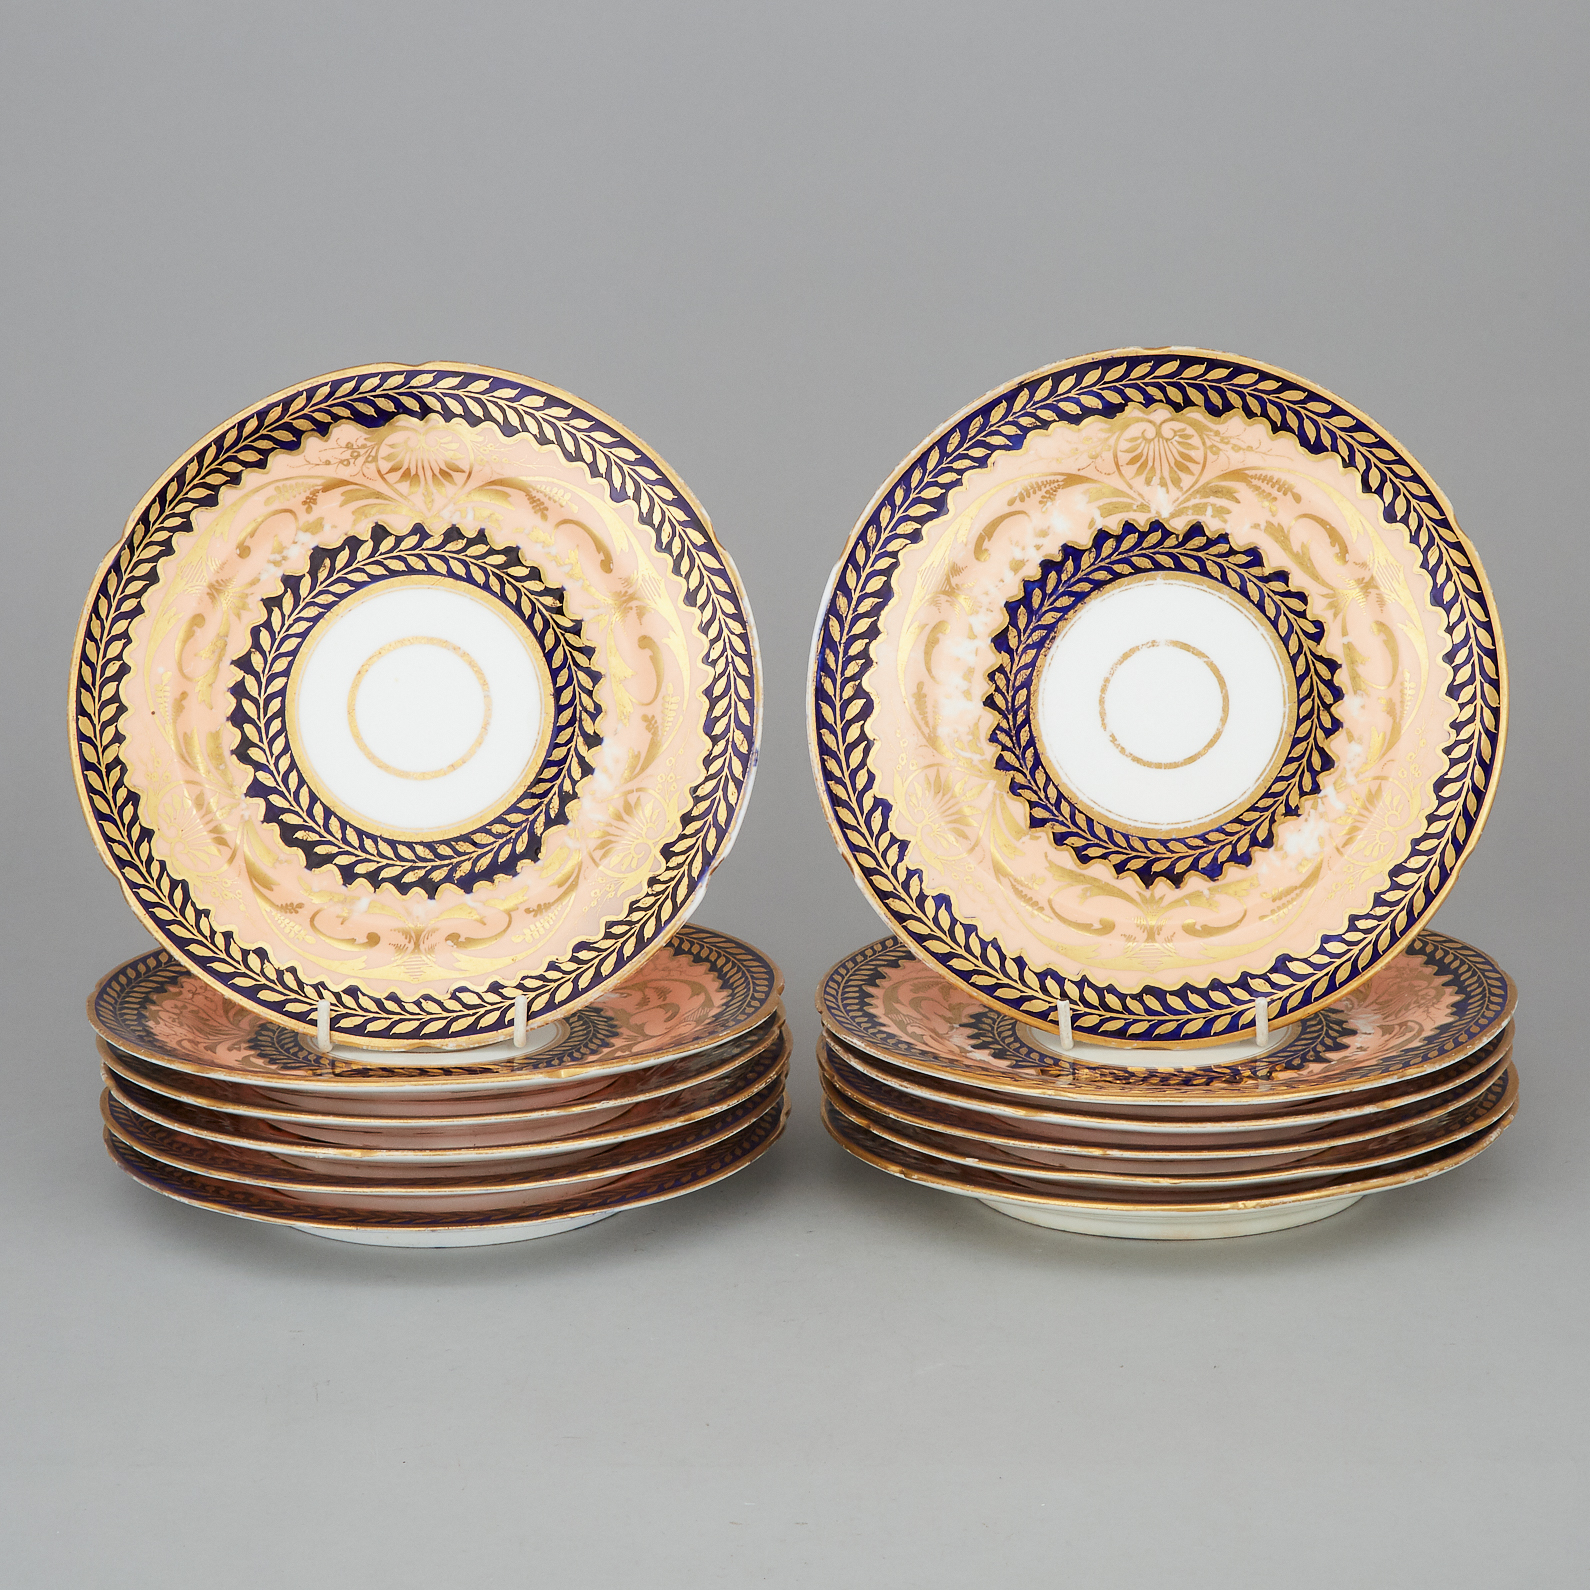 Twelve Coalport Apricot, Cobalt and Gilt Decorated Plates, early 19th century